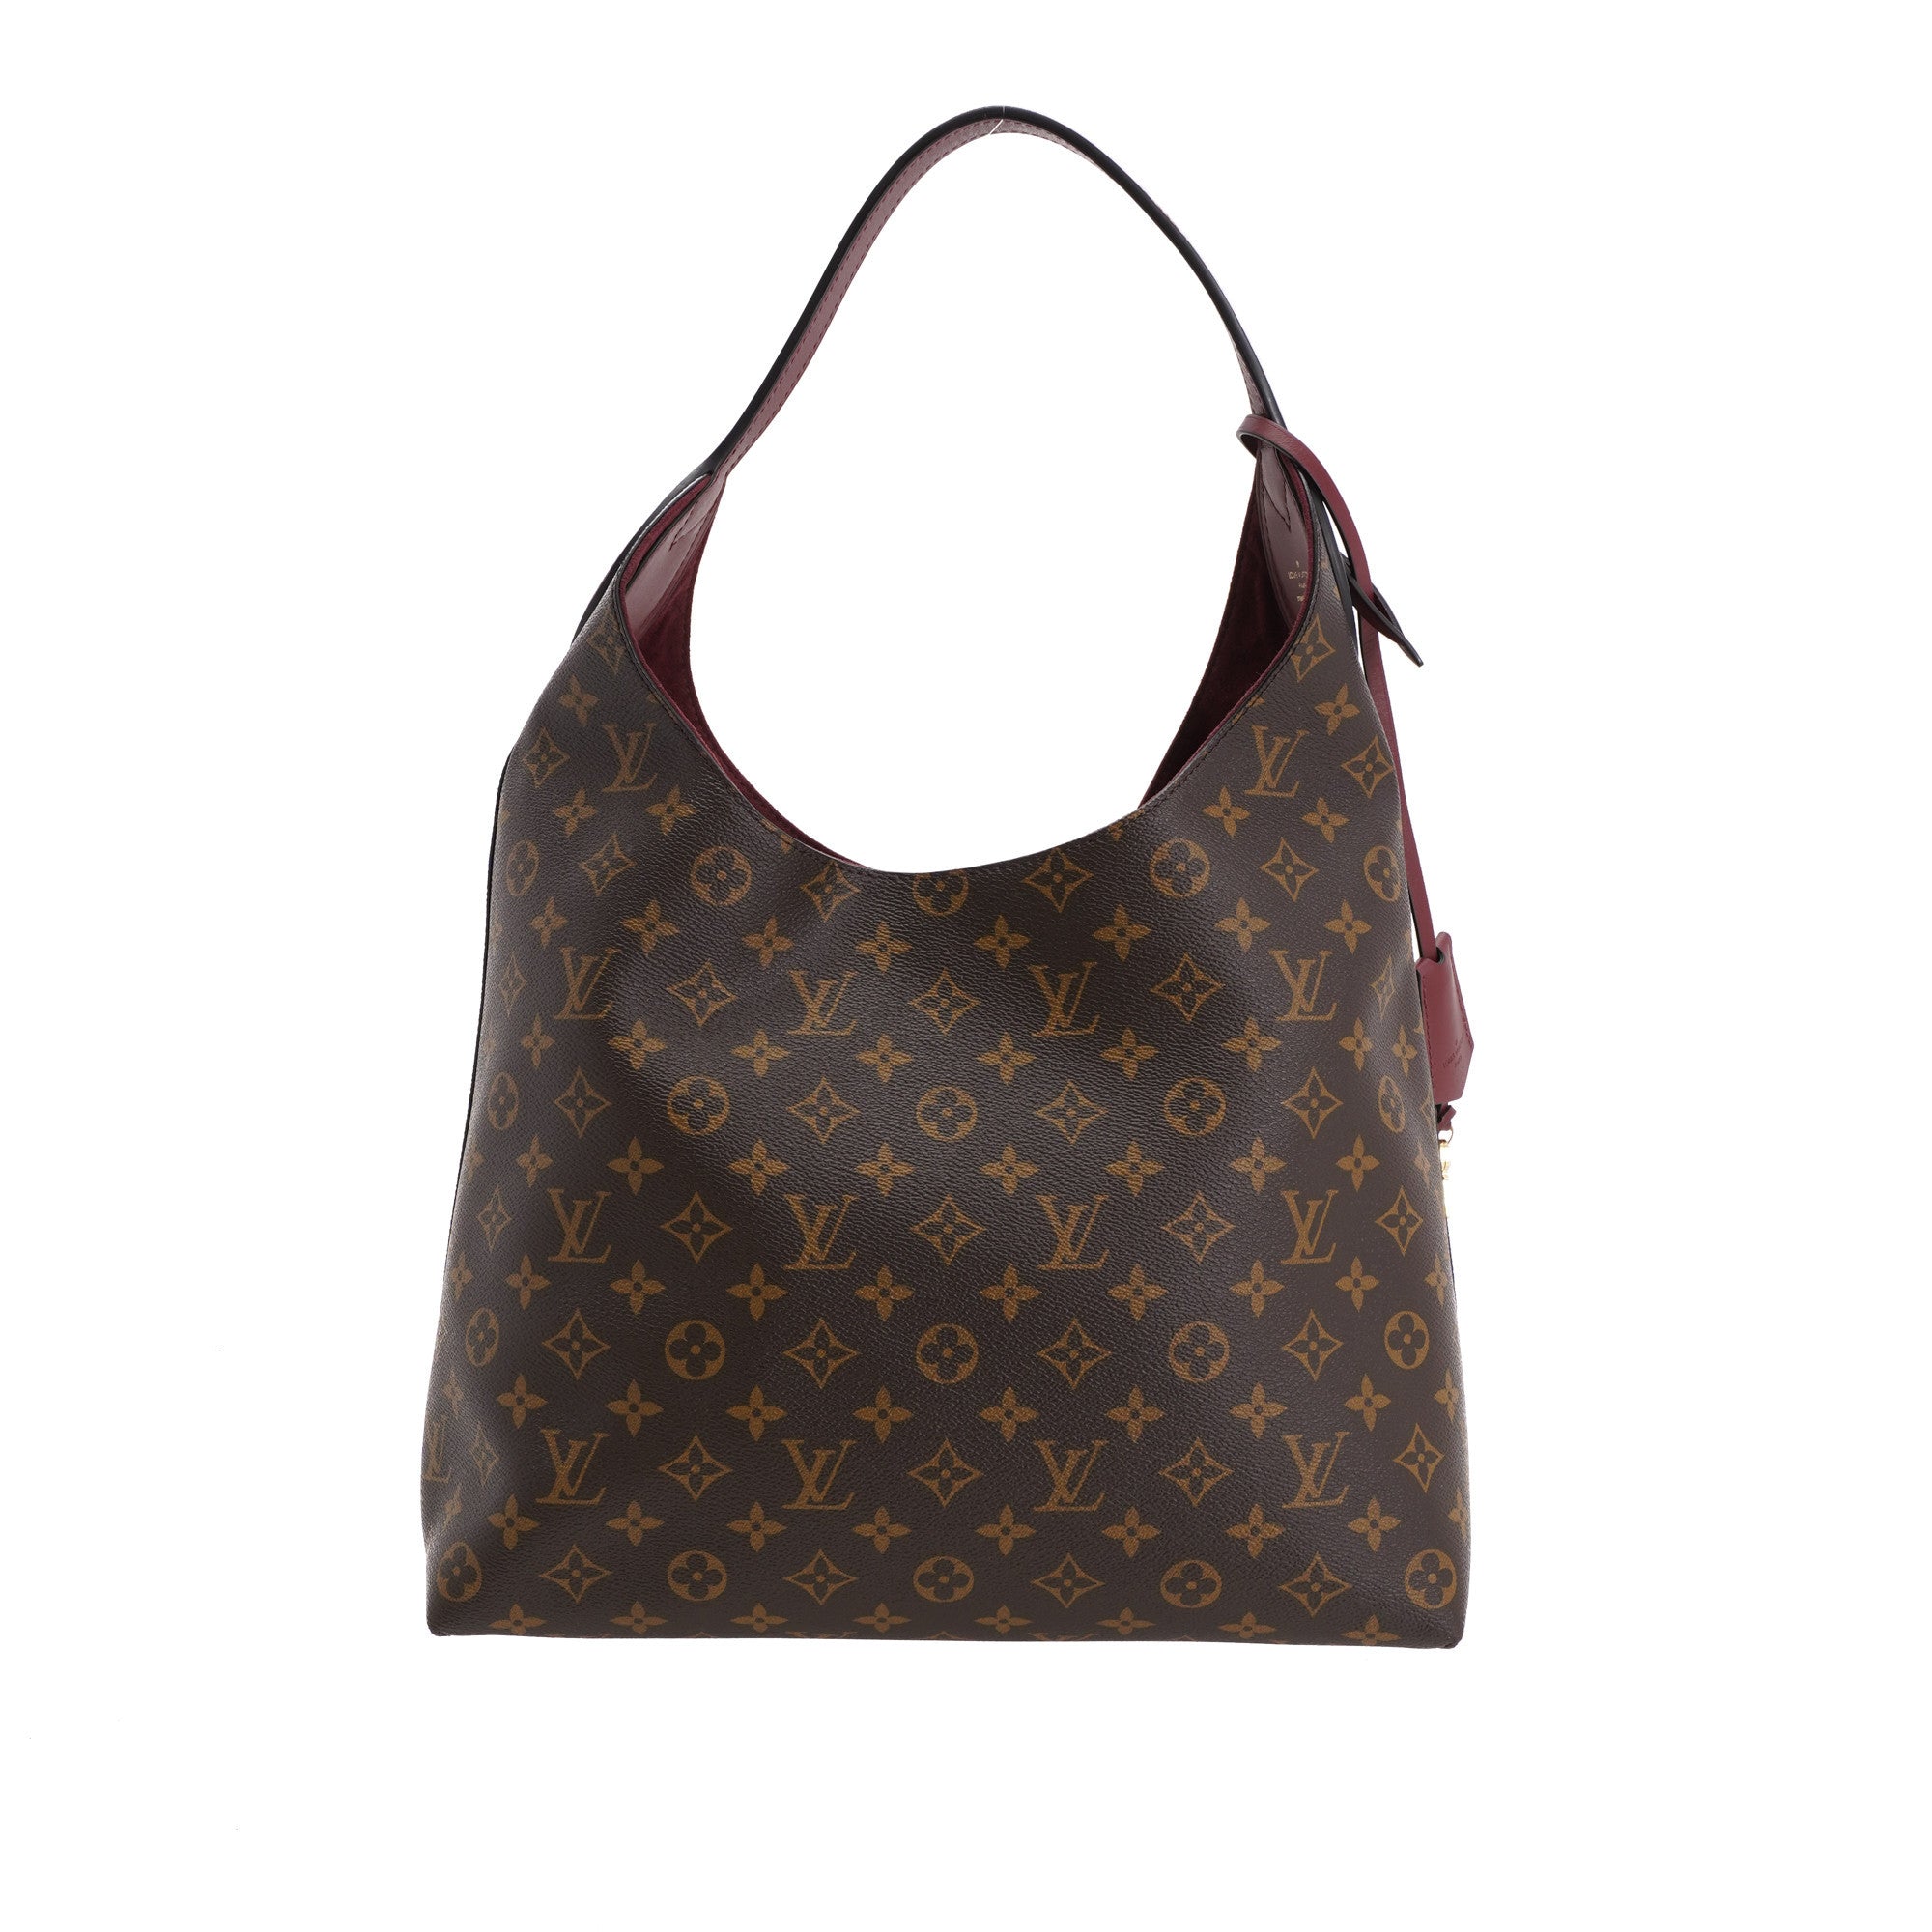 Authenticated Used LOUIS VUITTON Louis Vuitton Flower Hobo Shoulder Bag  M43545 Monogram Canvas Leather Brown Semi-Shoulder One Tote 